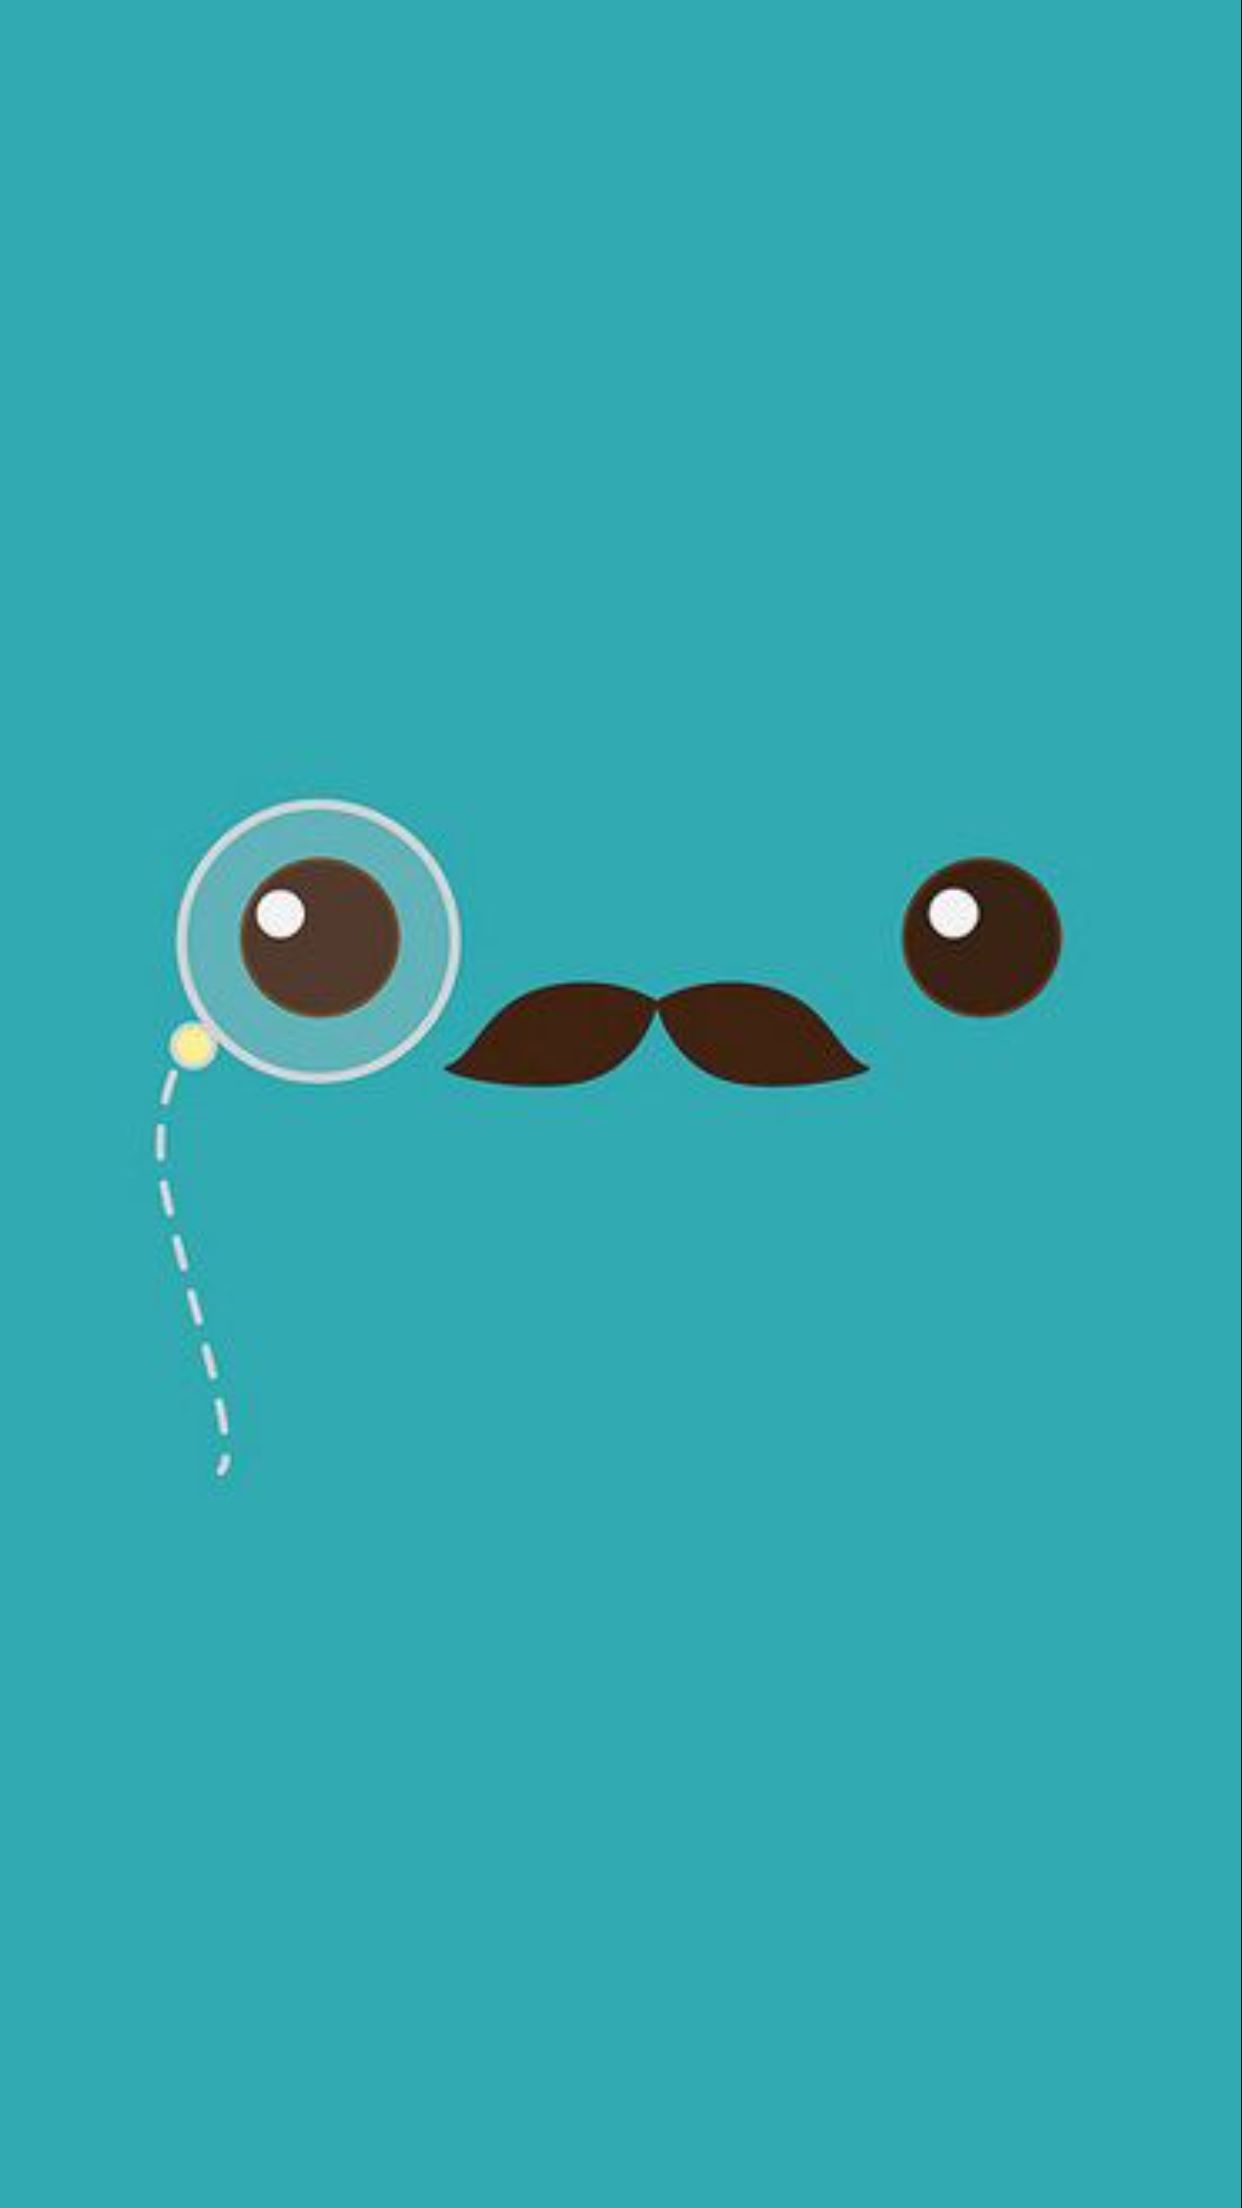 Awesome Mustache Wallpaper For Phones And Walls Men